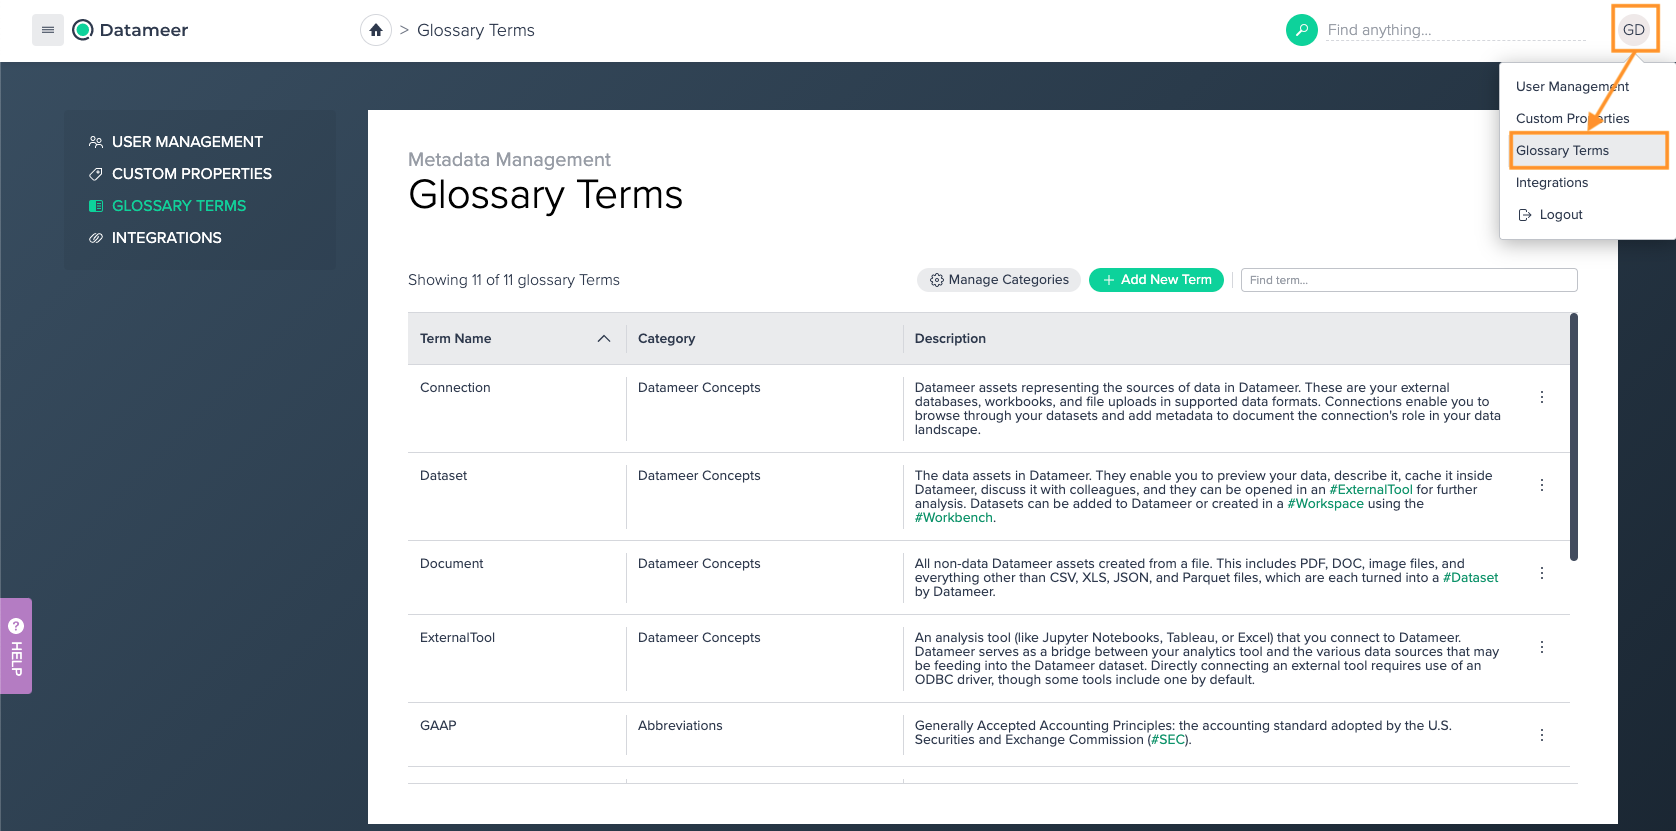 Glossary and Terminology
